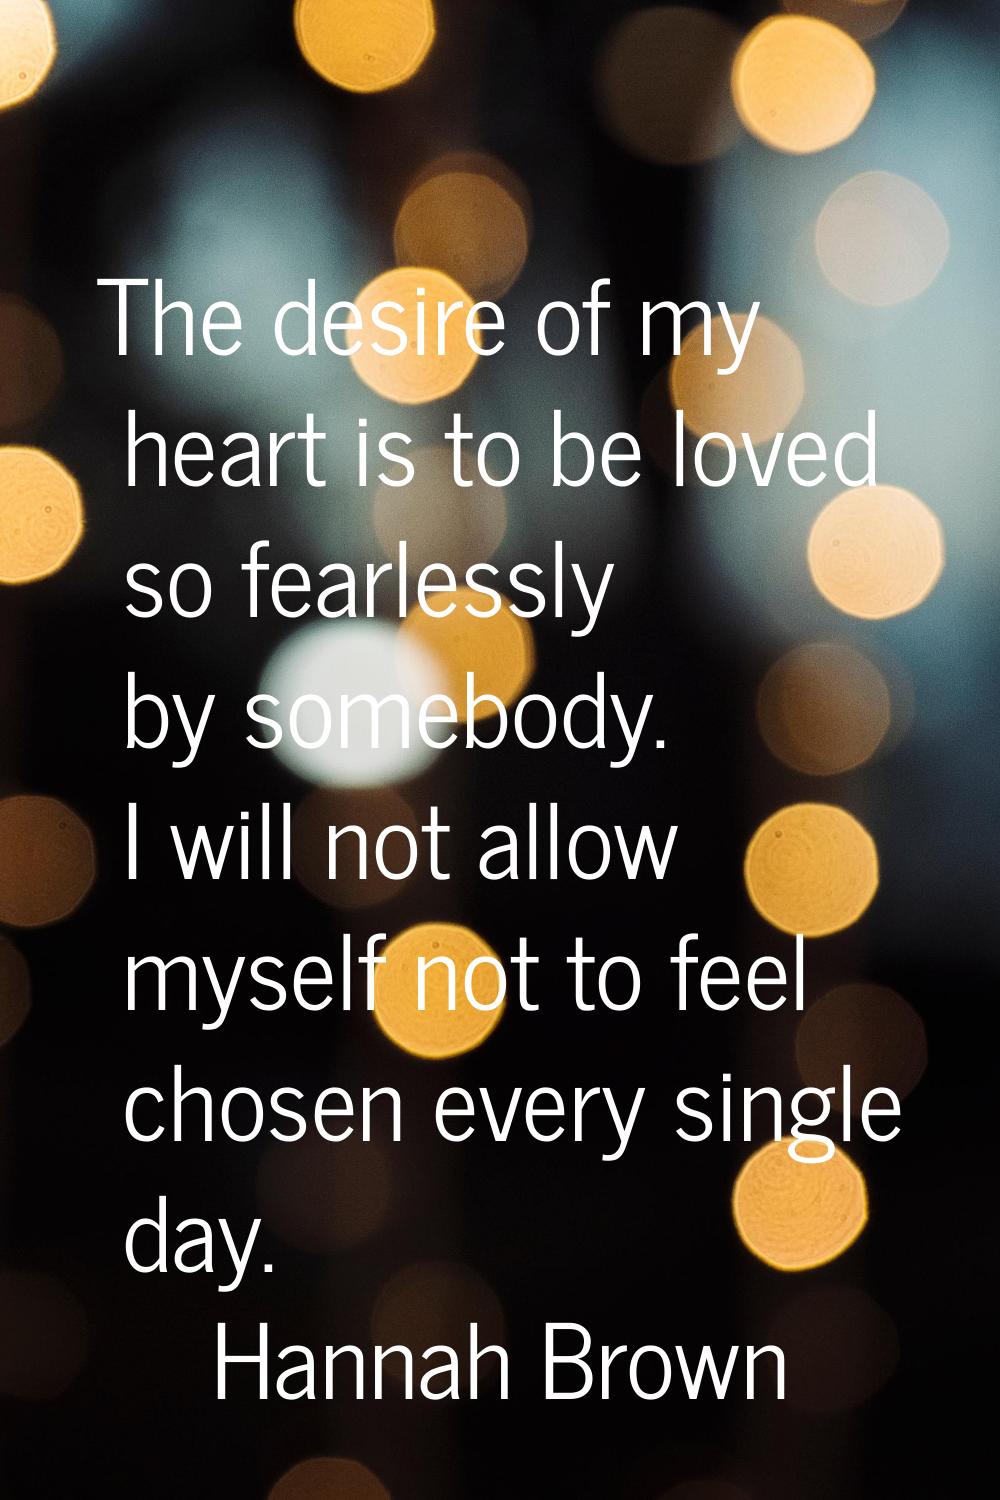 The desire of my heart is to be loved so fearlessly by somebody. I will not allow myself not to fee